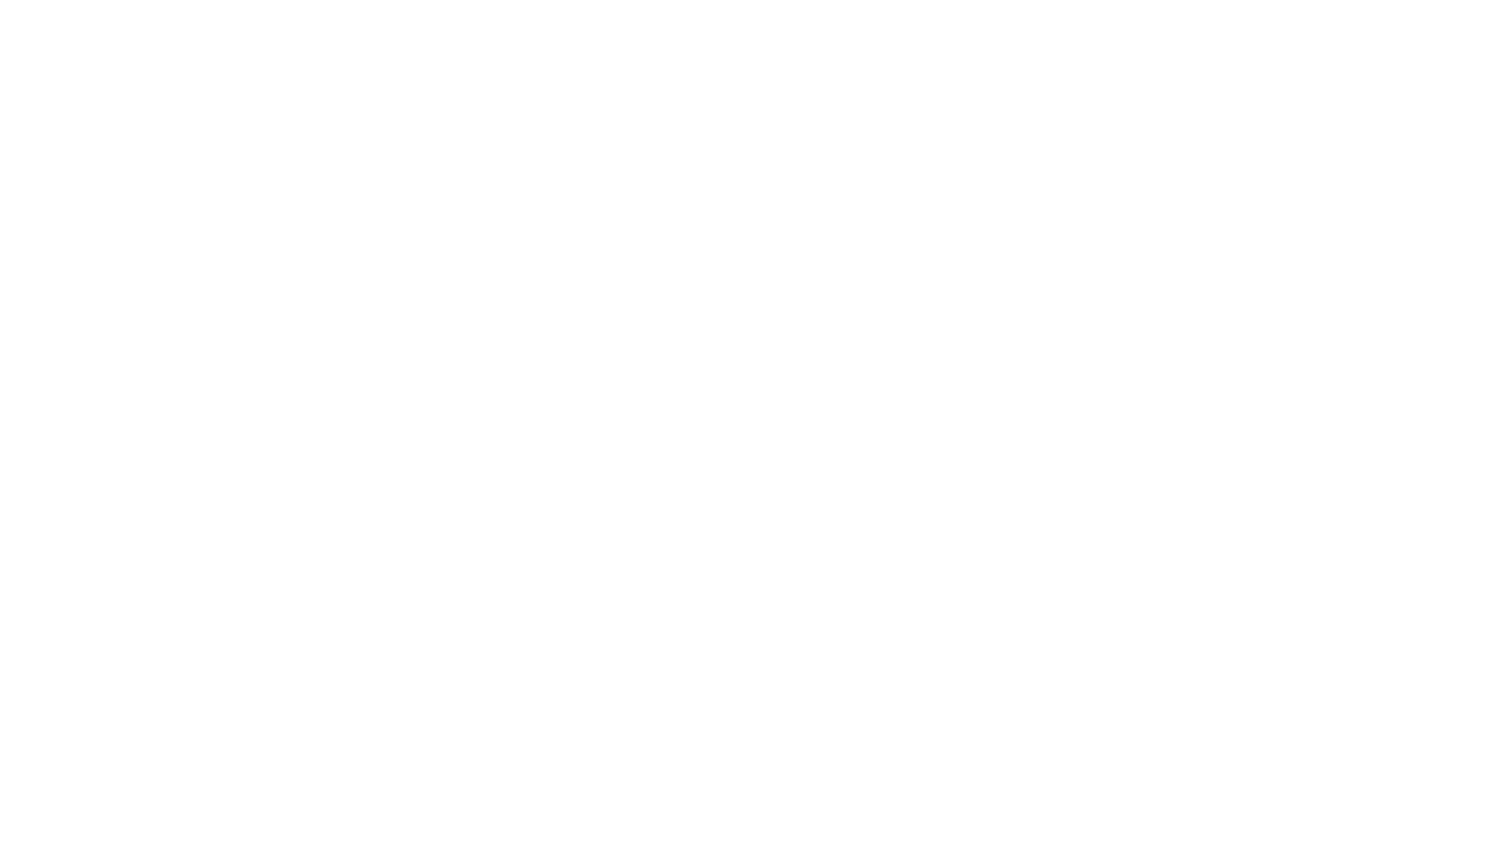 GMV Software as a Service for Transit